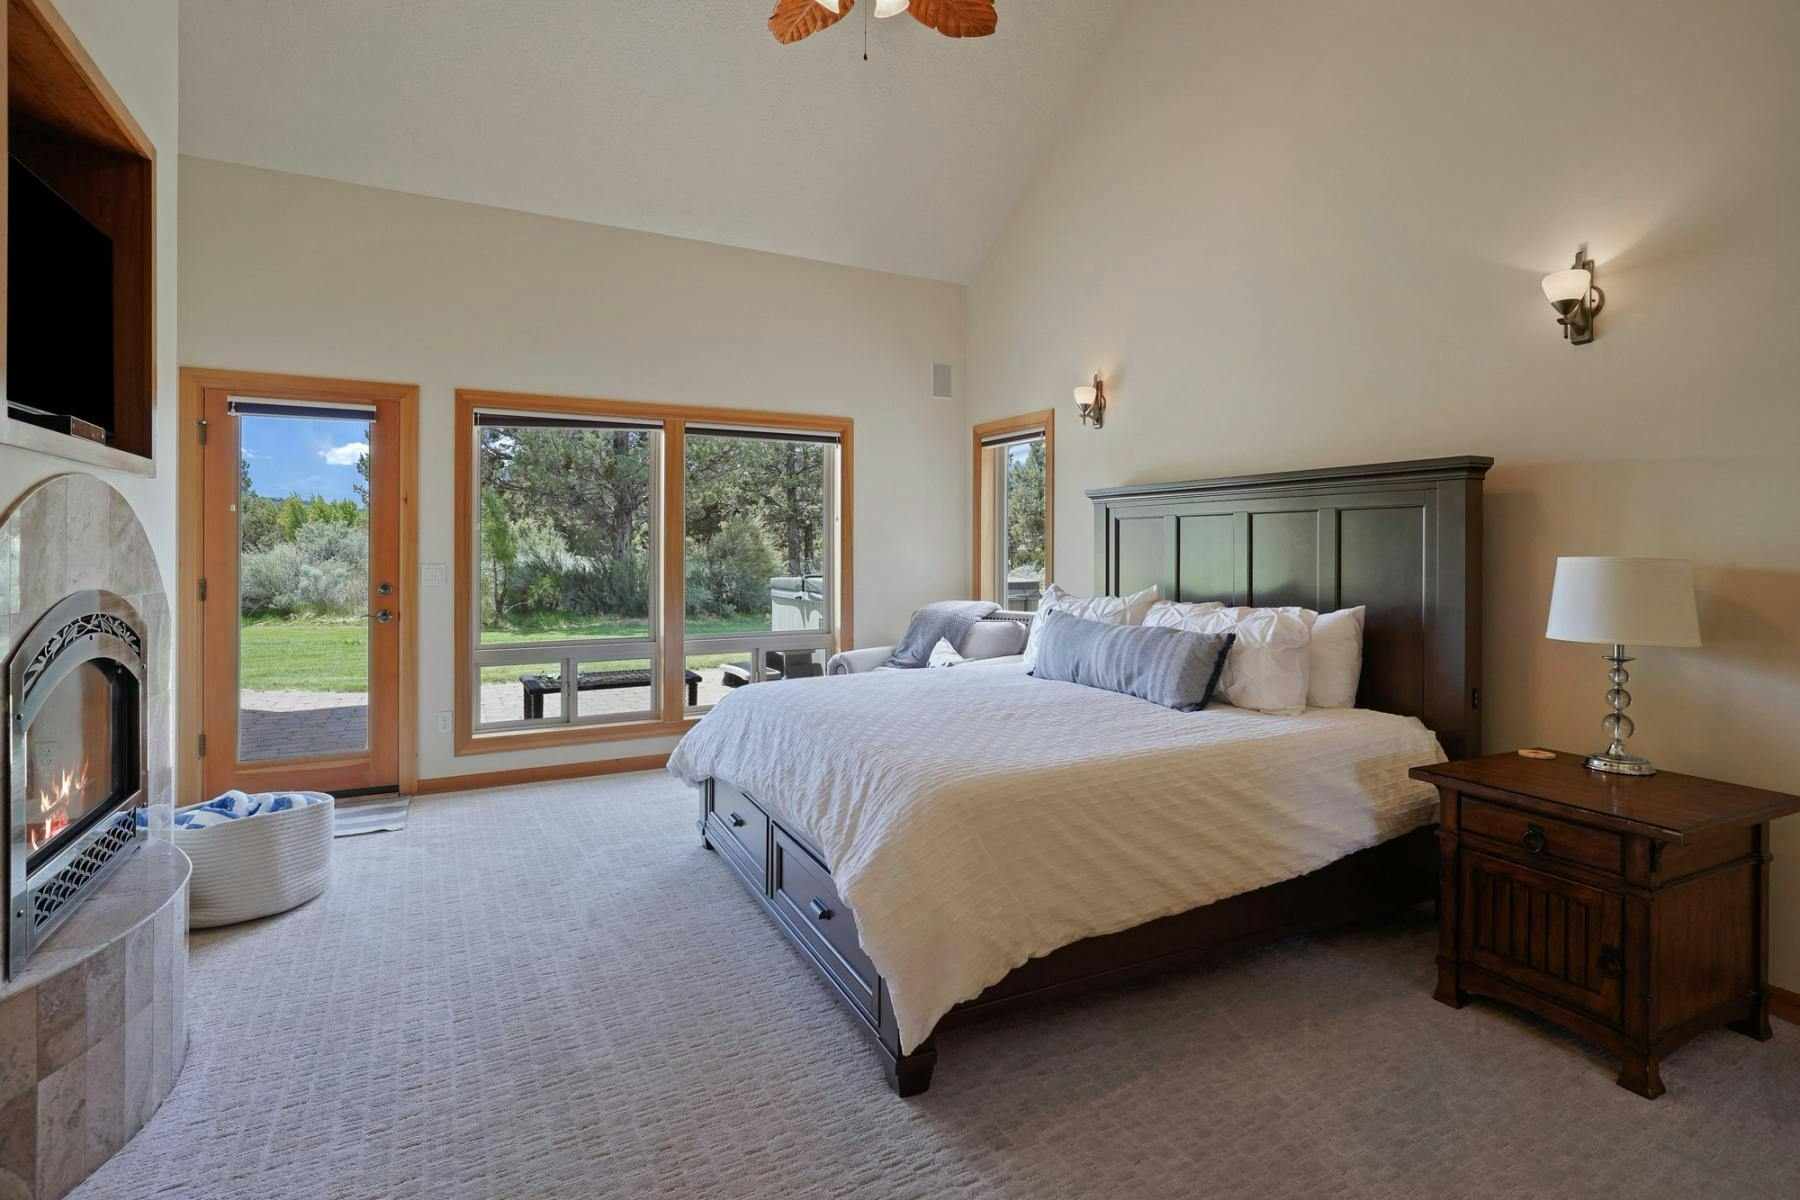 Primary bedroom in Bend, Oregon vacation home with secluded views